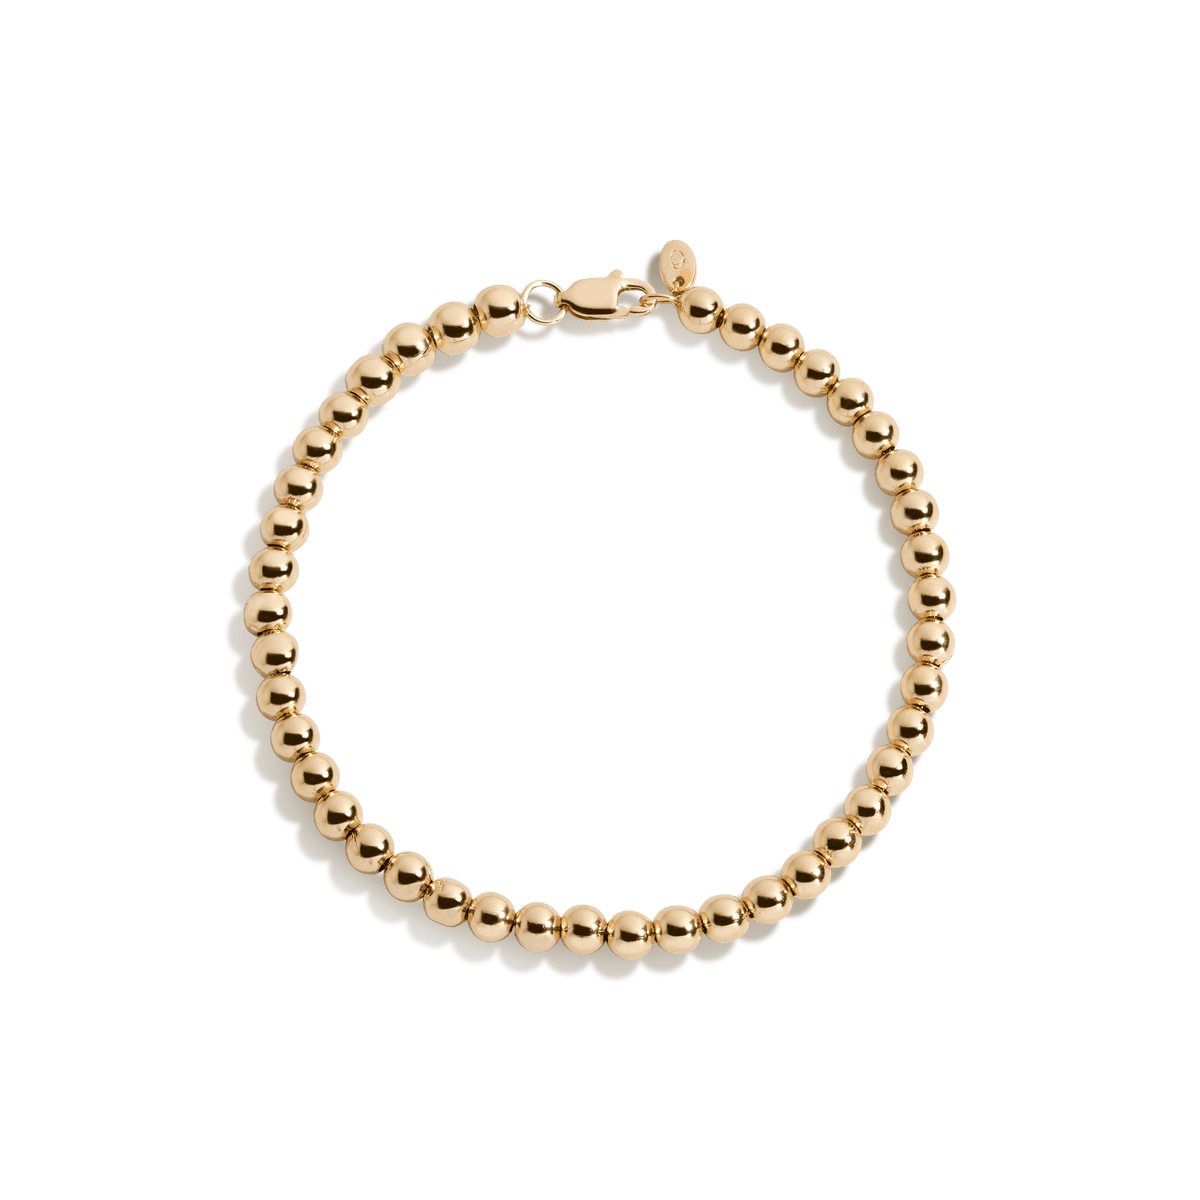 Aurate New York Gold Ball Bracelet 6mm, Vermeil Yellow Gold, Size 7.5in